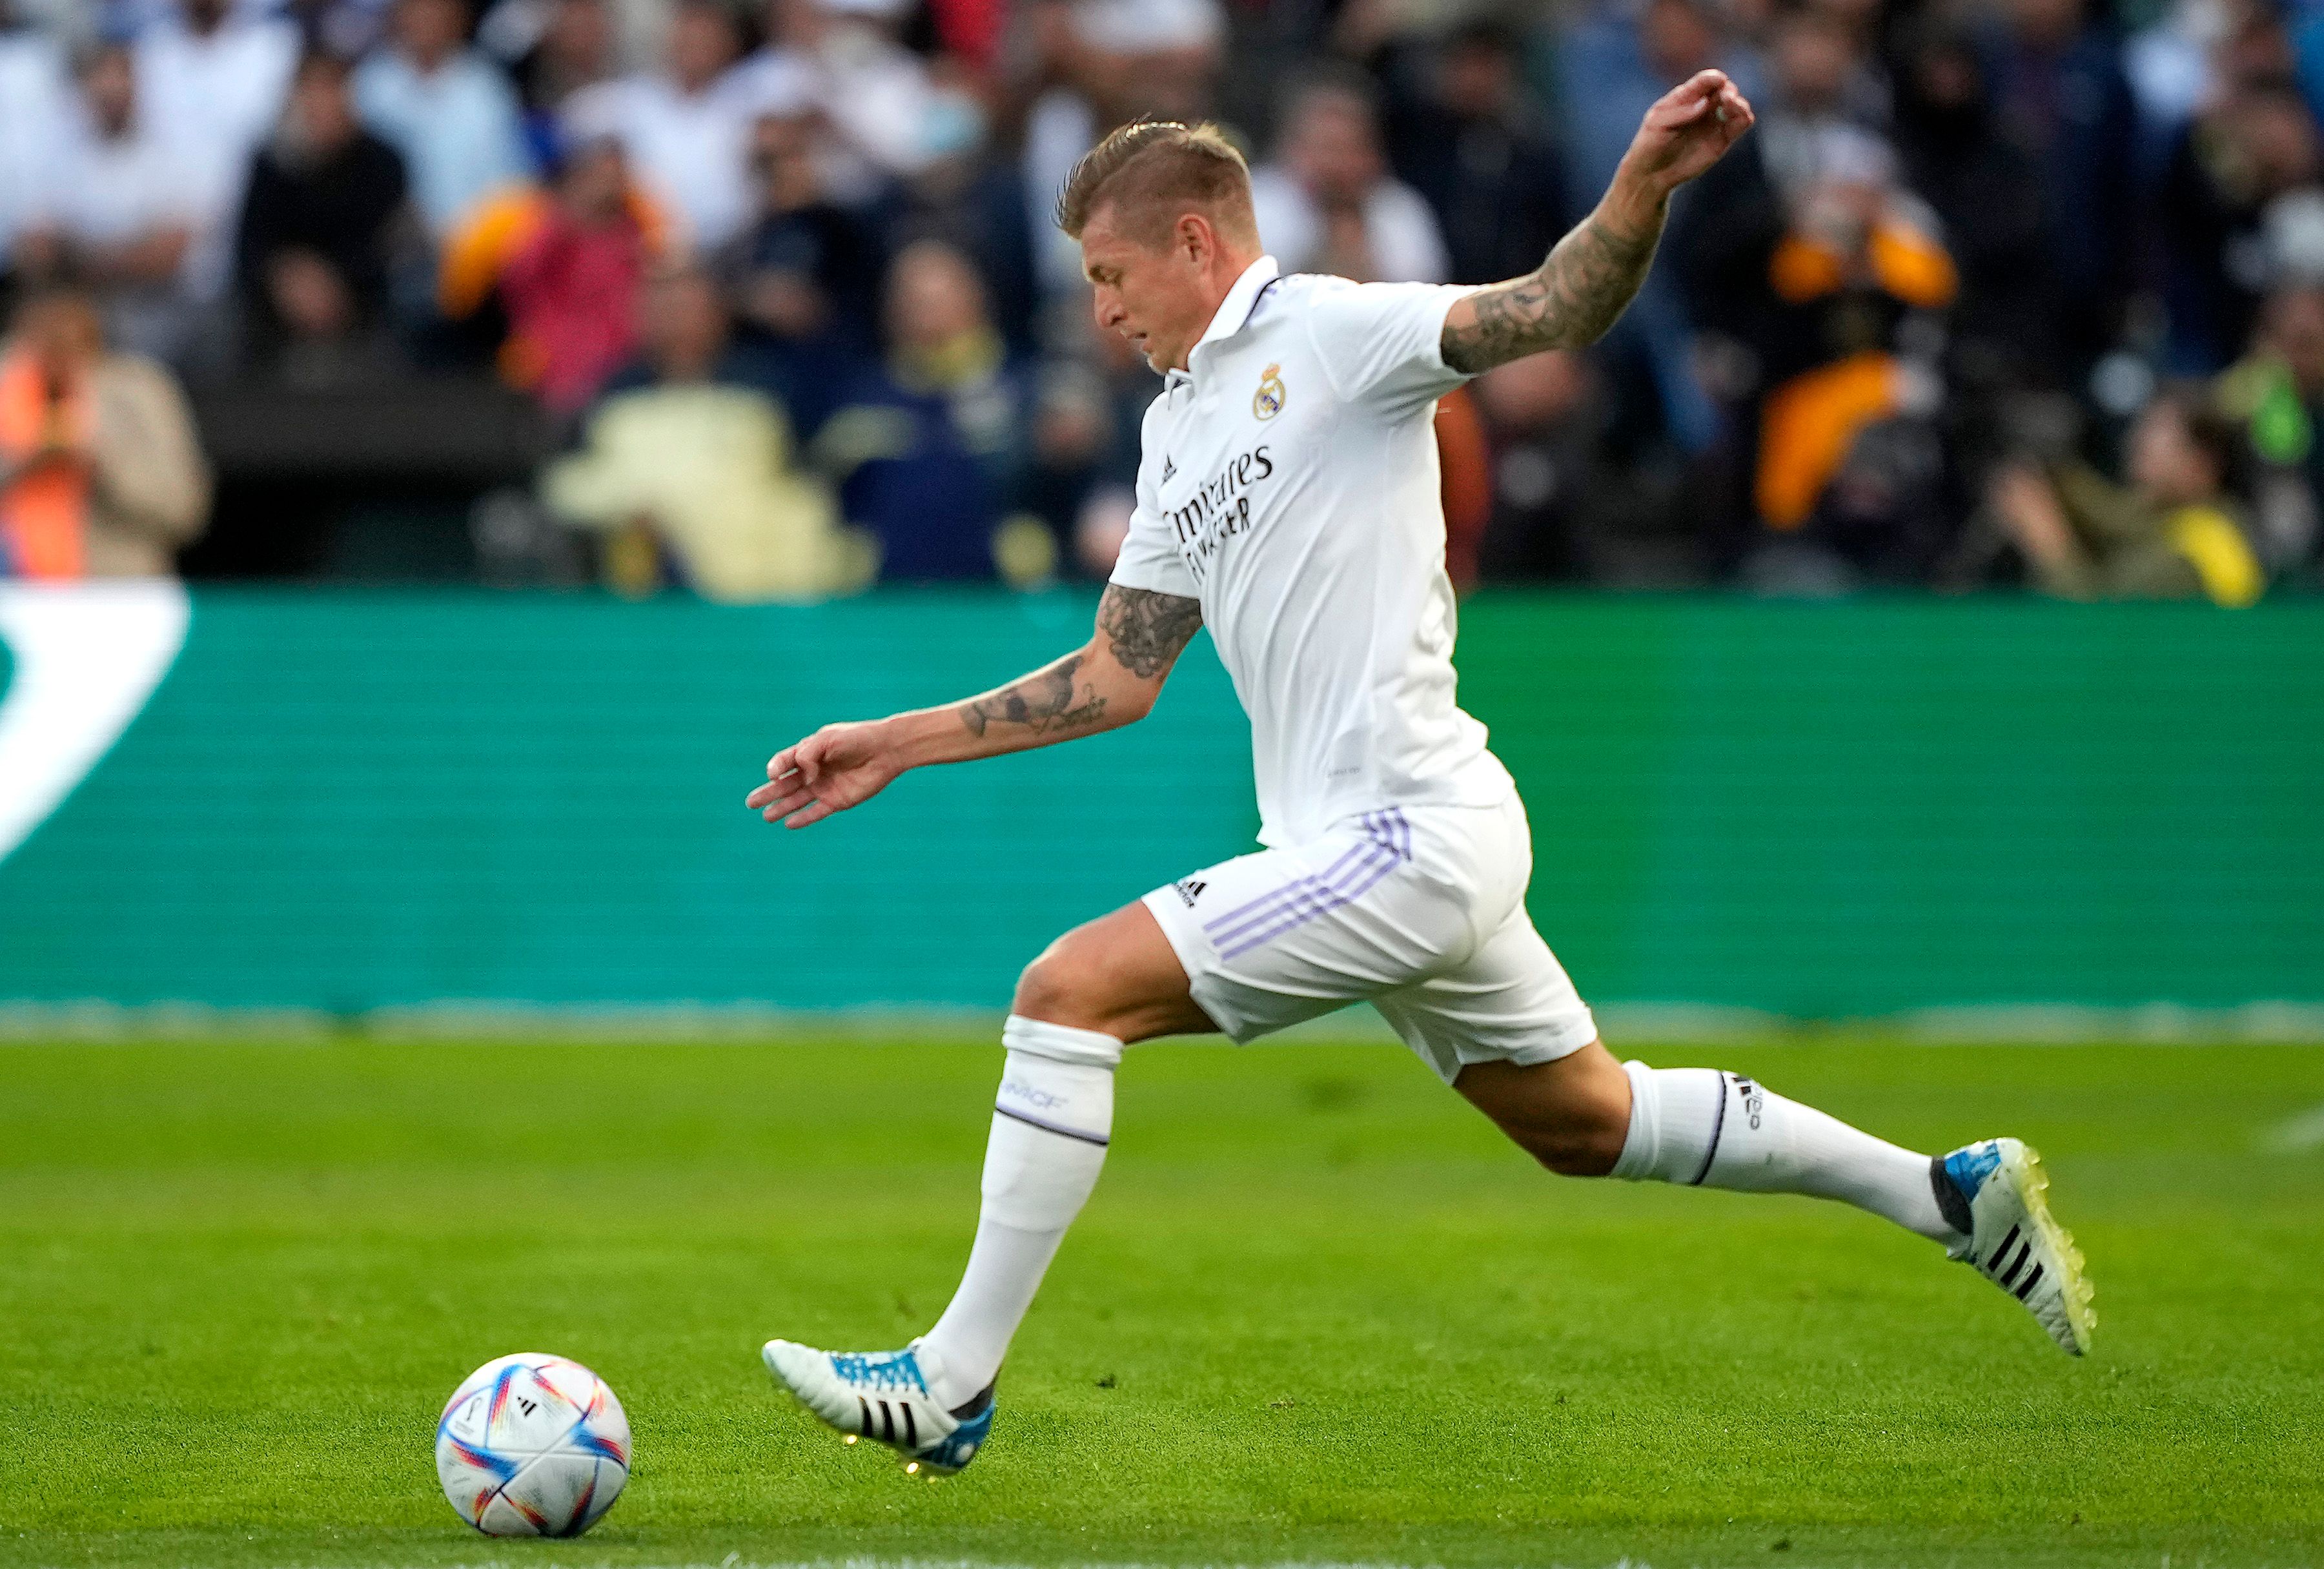 Toni Kroos #8 of Real Madrid looks to pass